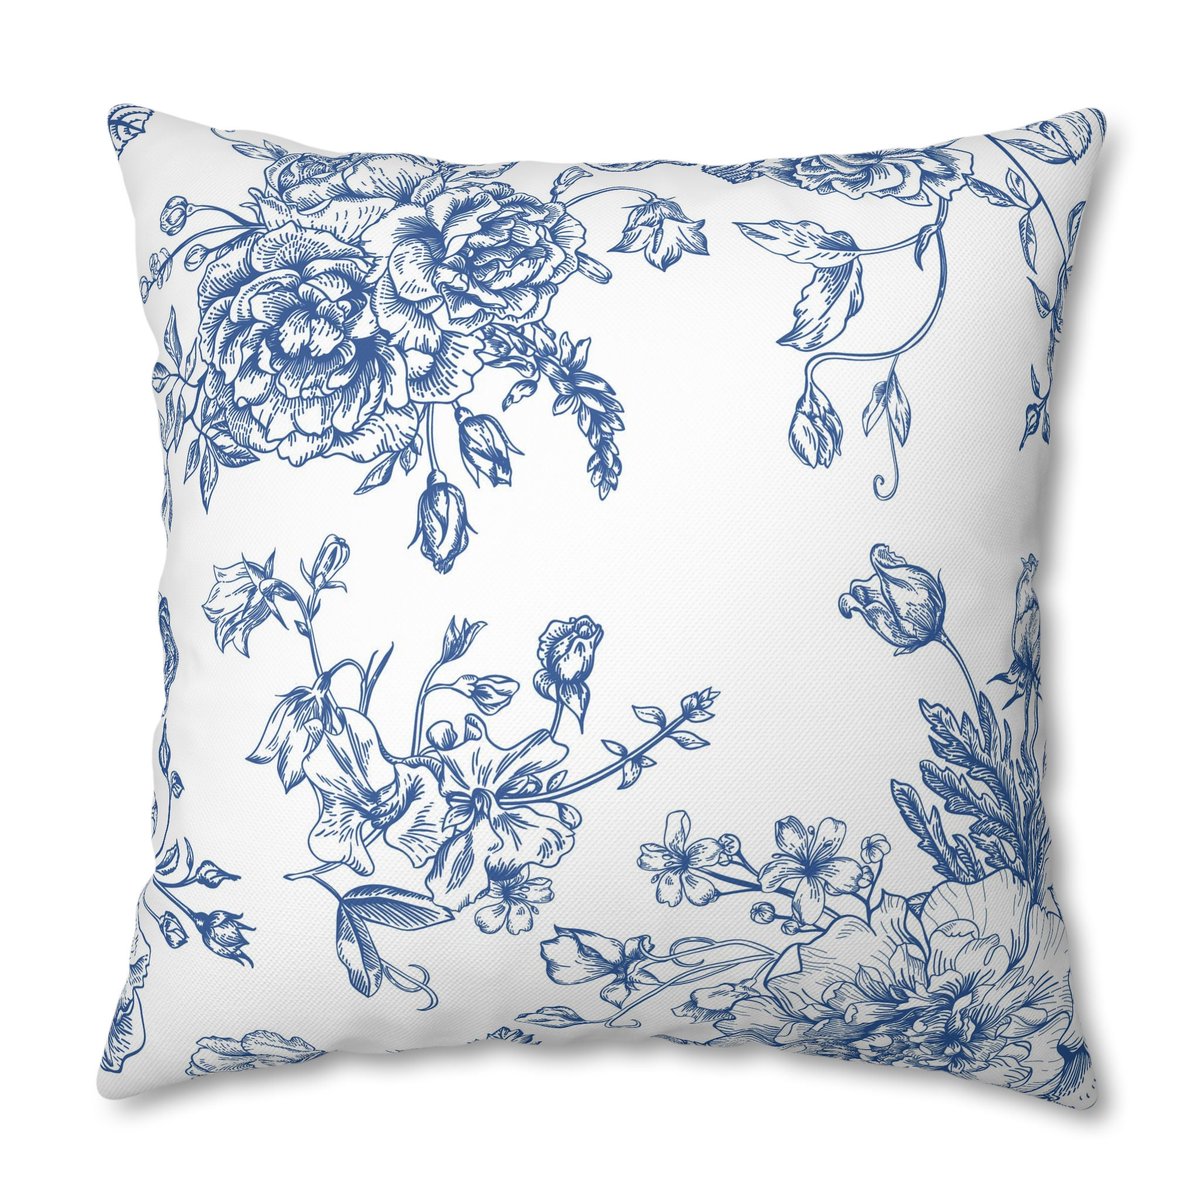 Blue Throw Pillow Covers, Floral Decorative Pillow Covers Sofa 16 x 16 Blue Euro Sham Covers etsy.me/3T42T31 #square #floral #bedroom #etsy #bluethrowpillow #pillowcover #decorativepillows #sofapillows